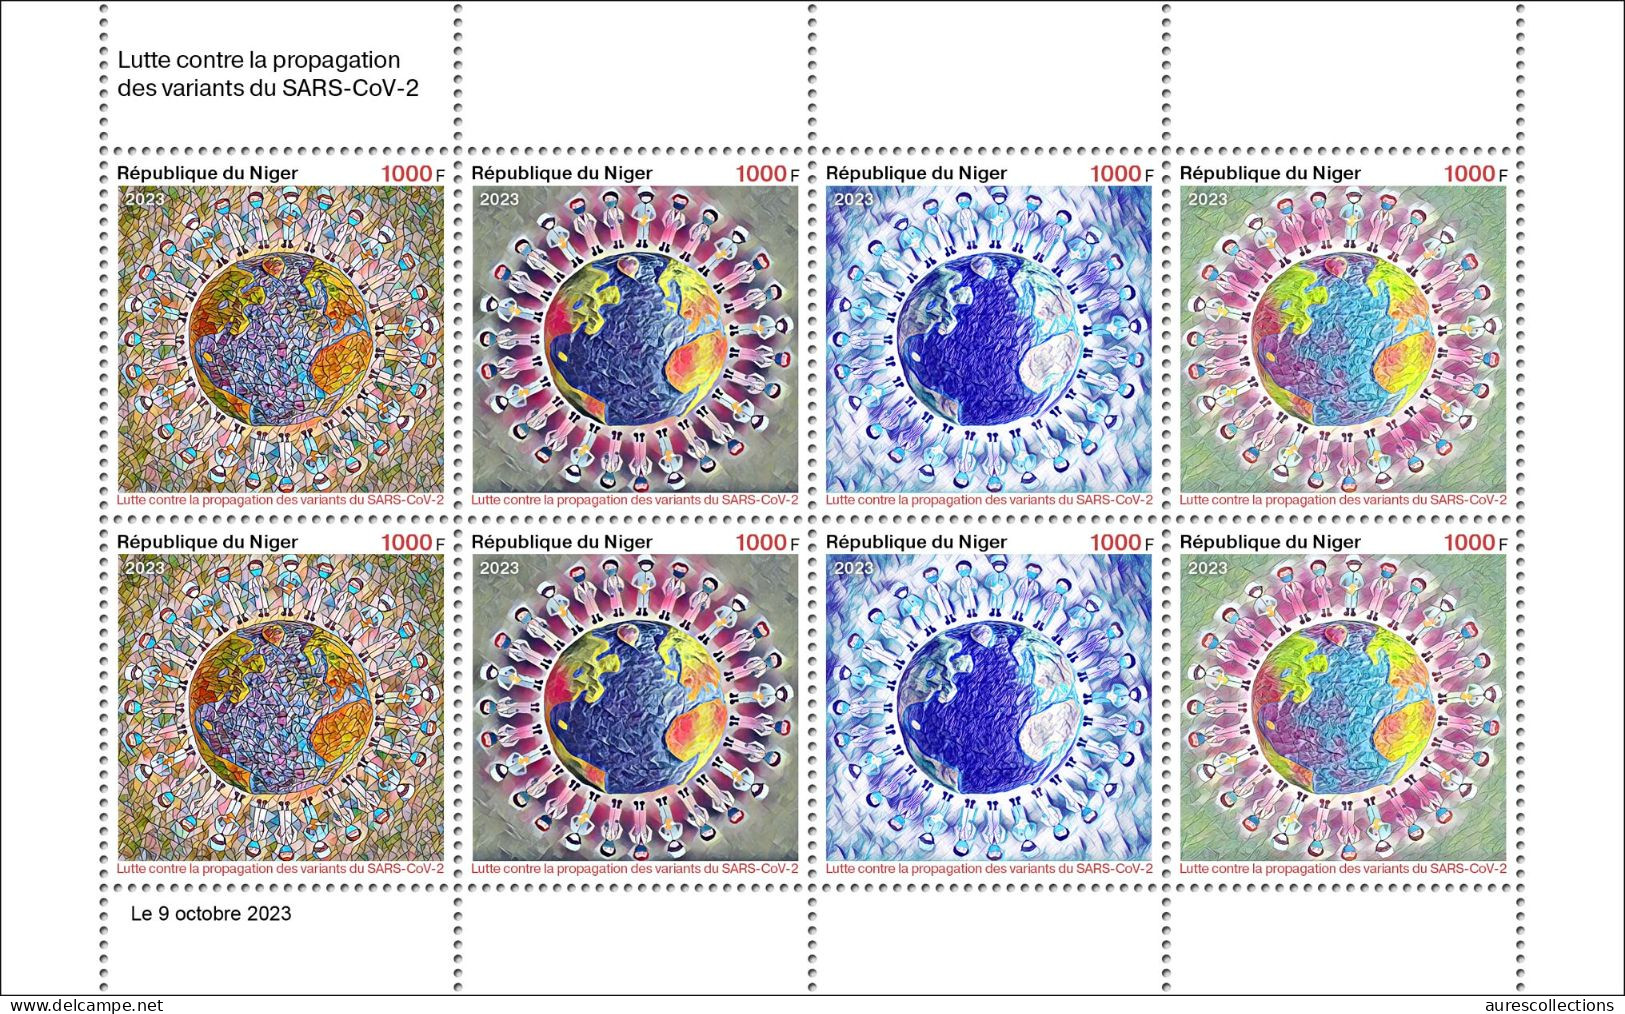 NIGER 2023 - BOOKLET M/S 8V - COVID-19 PANDEMIC VARIANTS OF SARS - JOINT ISSUE - MNH - Joint Issues